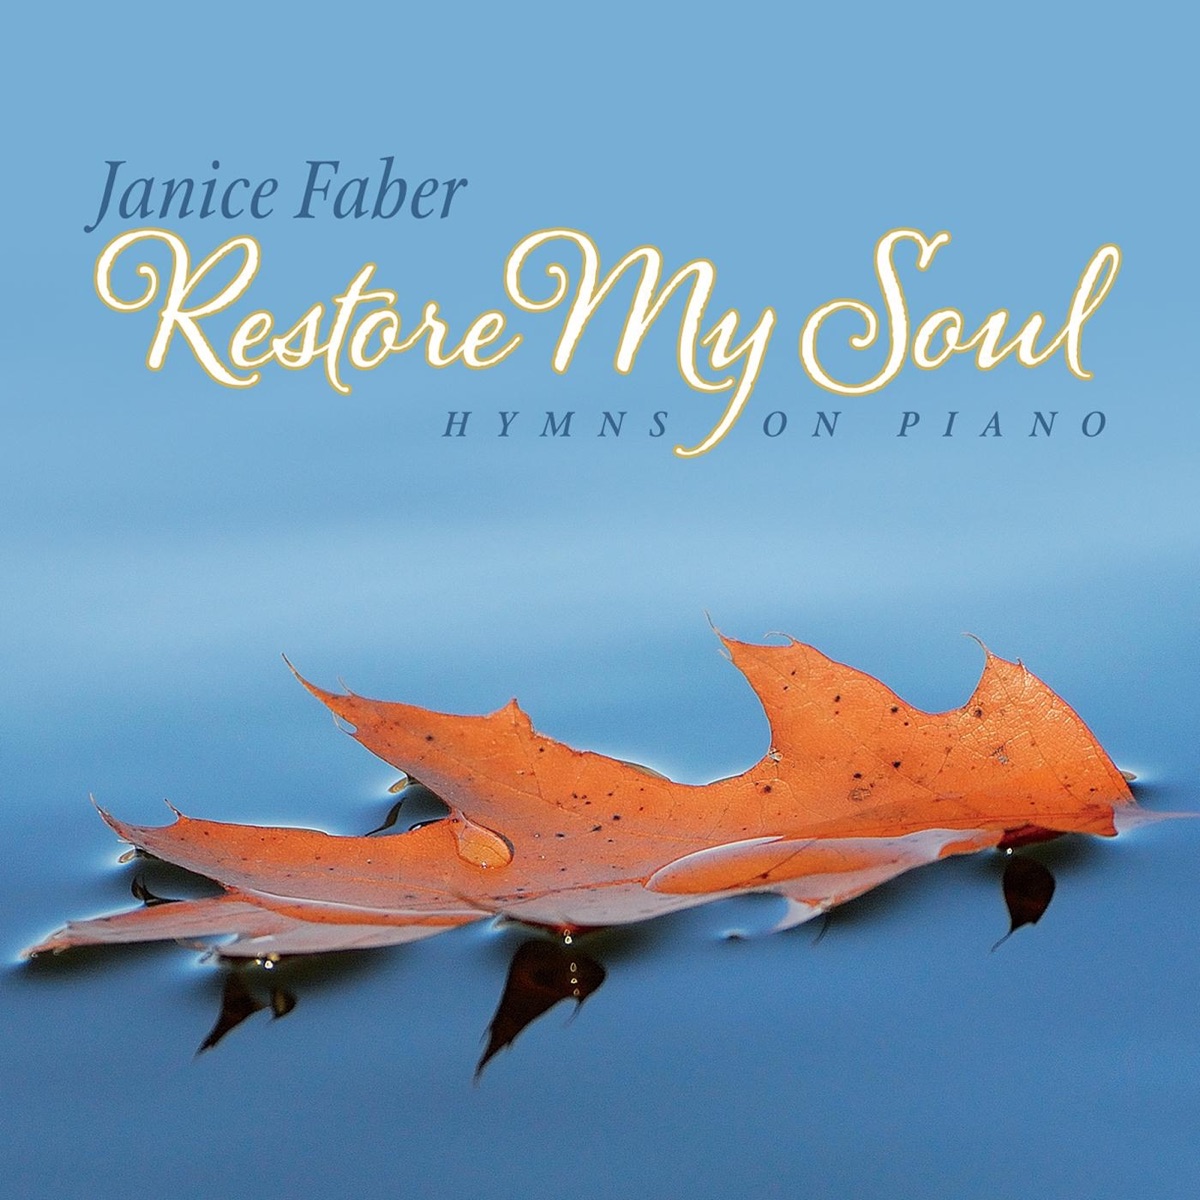 Revelation Song by Janice Faber